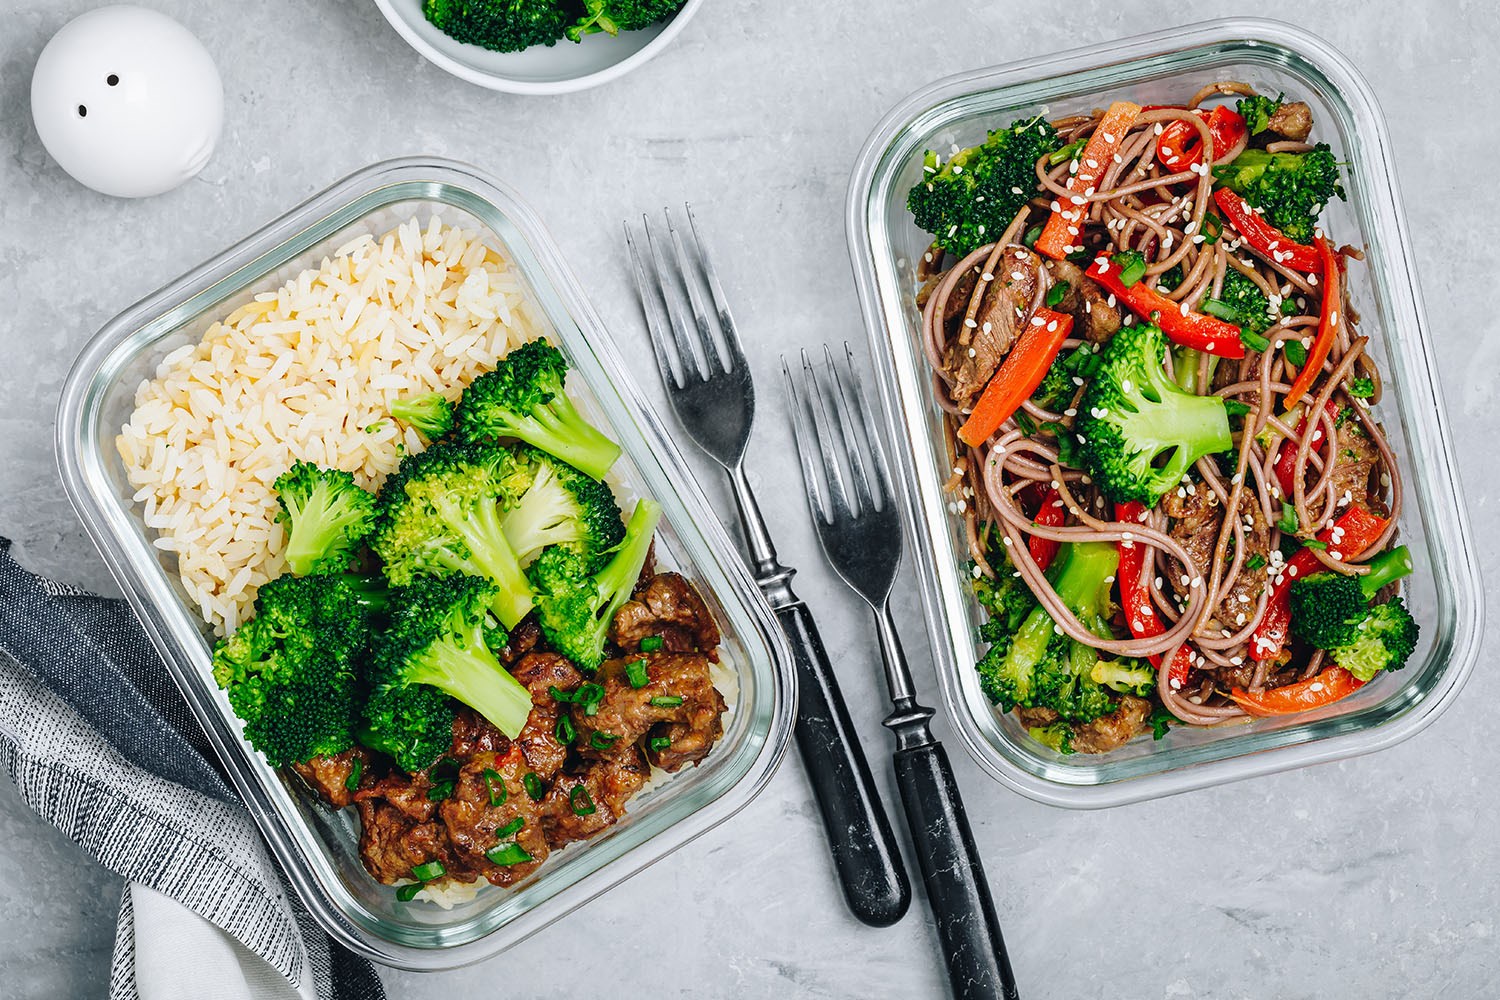 How to improve your meal prep skills while in isolation | Better Homes ...